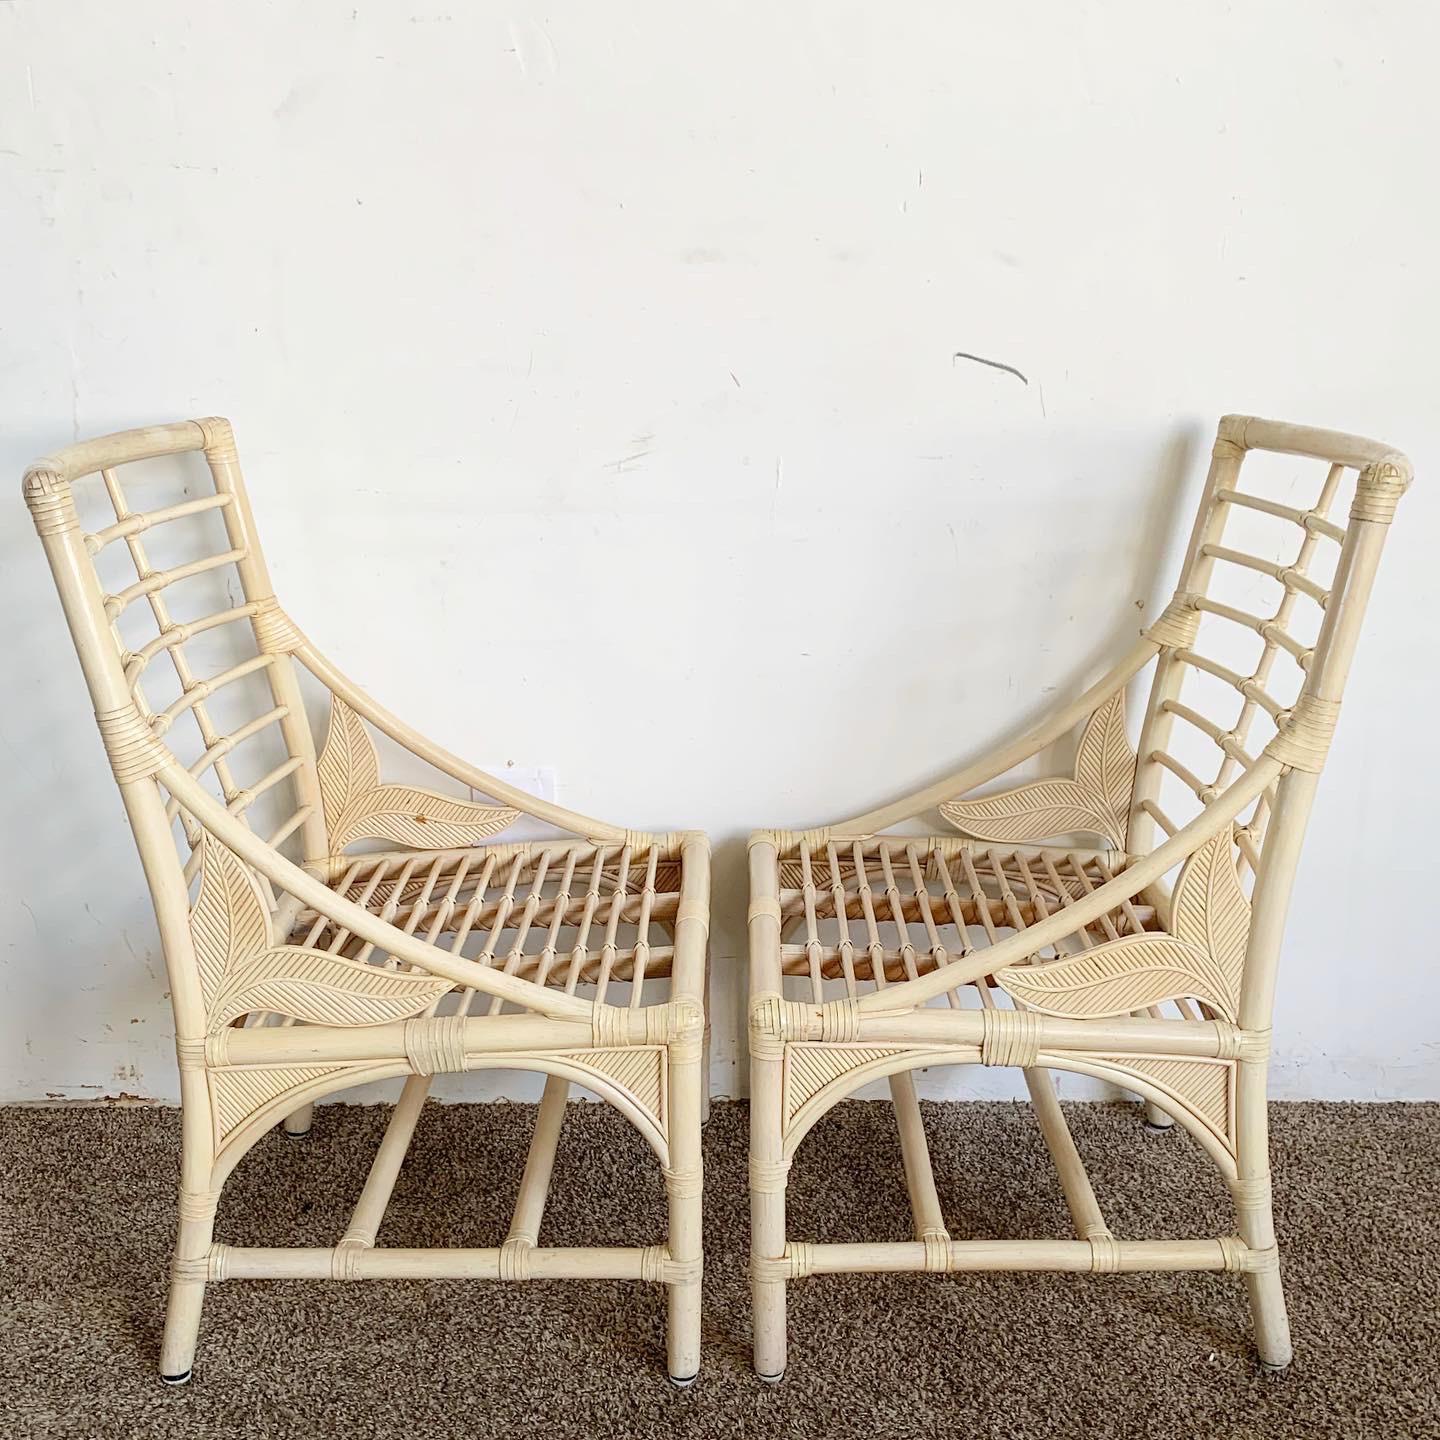 Philippine Boho Chic Bamboo Rattan Sculpted Pencil Reed Dining Chairs - Set of 4 For Sale